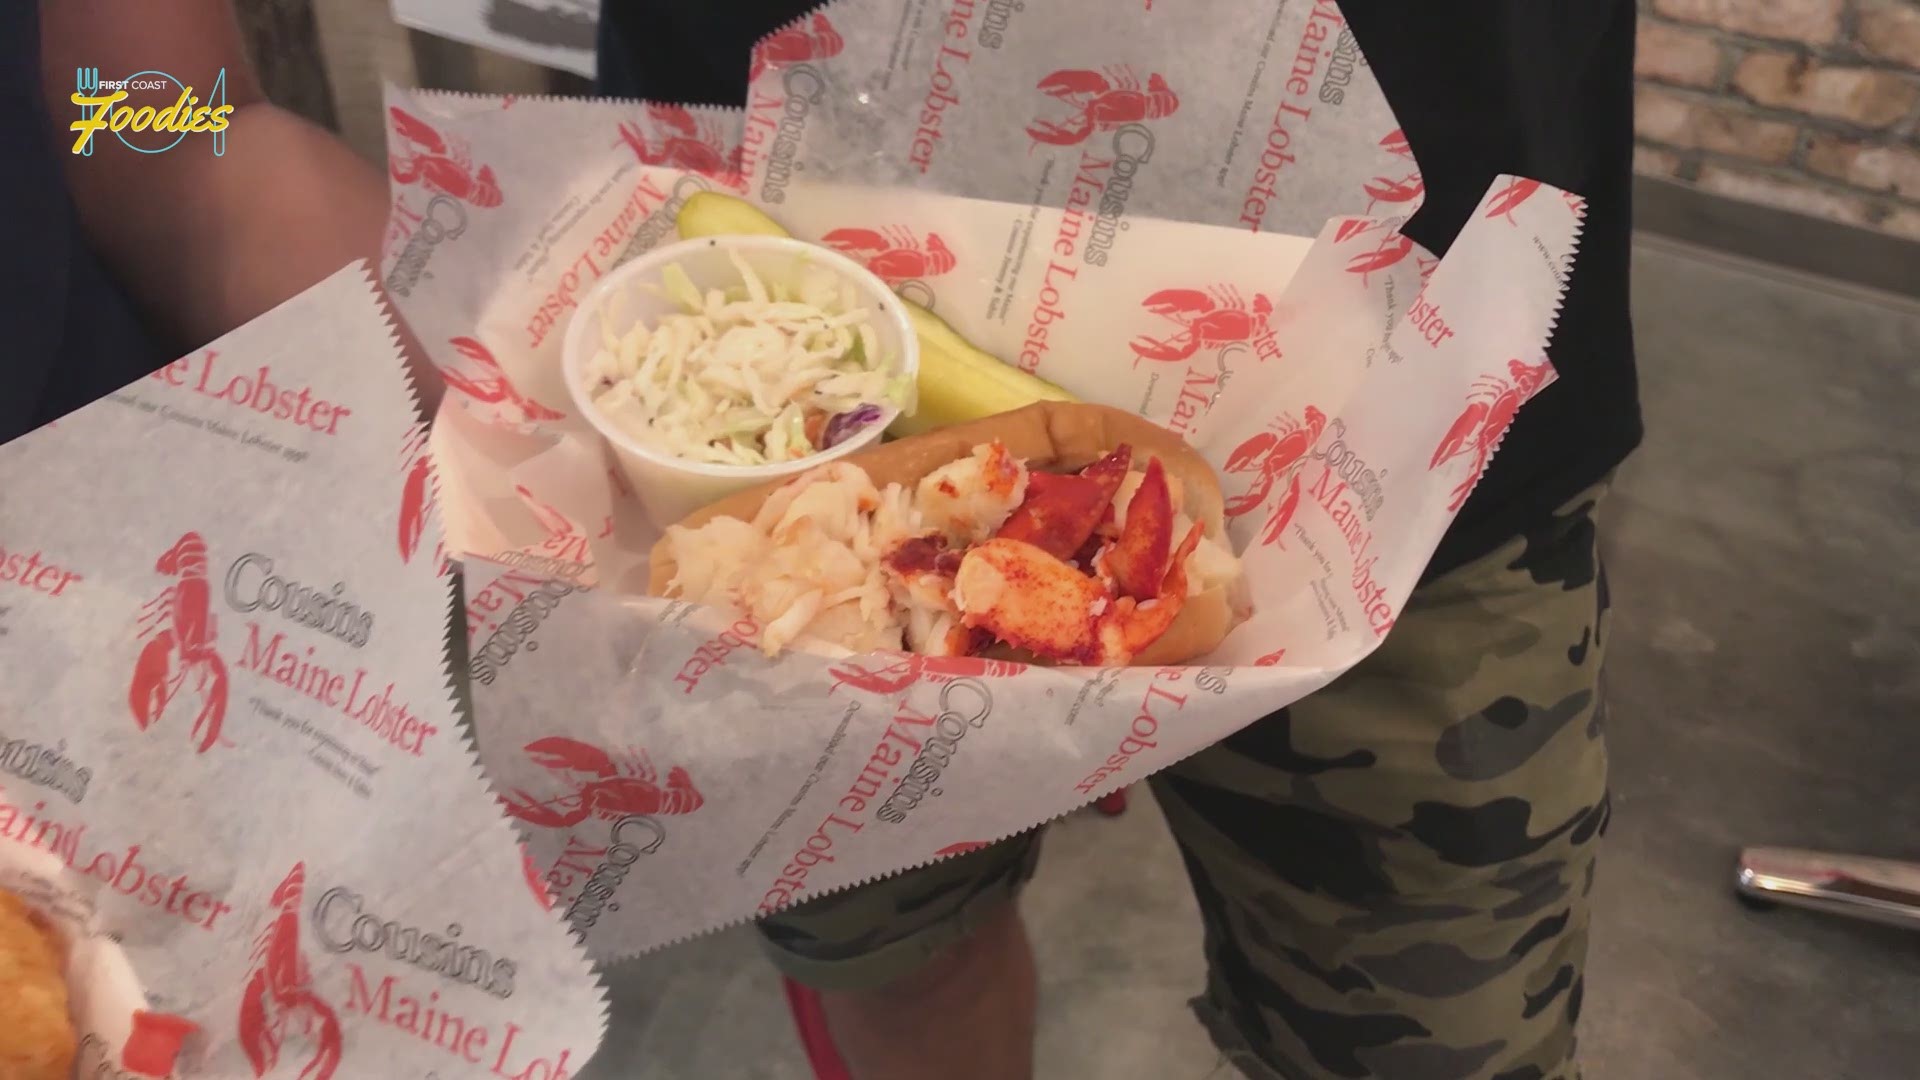 If you love lobster, check out the brand new restaurant in Neptune Beach, Cousins Maine Lobster. It offers customers traditional New England favorites like lobster rolls, and lobster dishes with a twist!